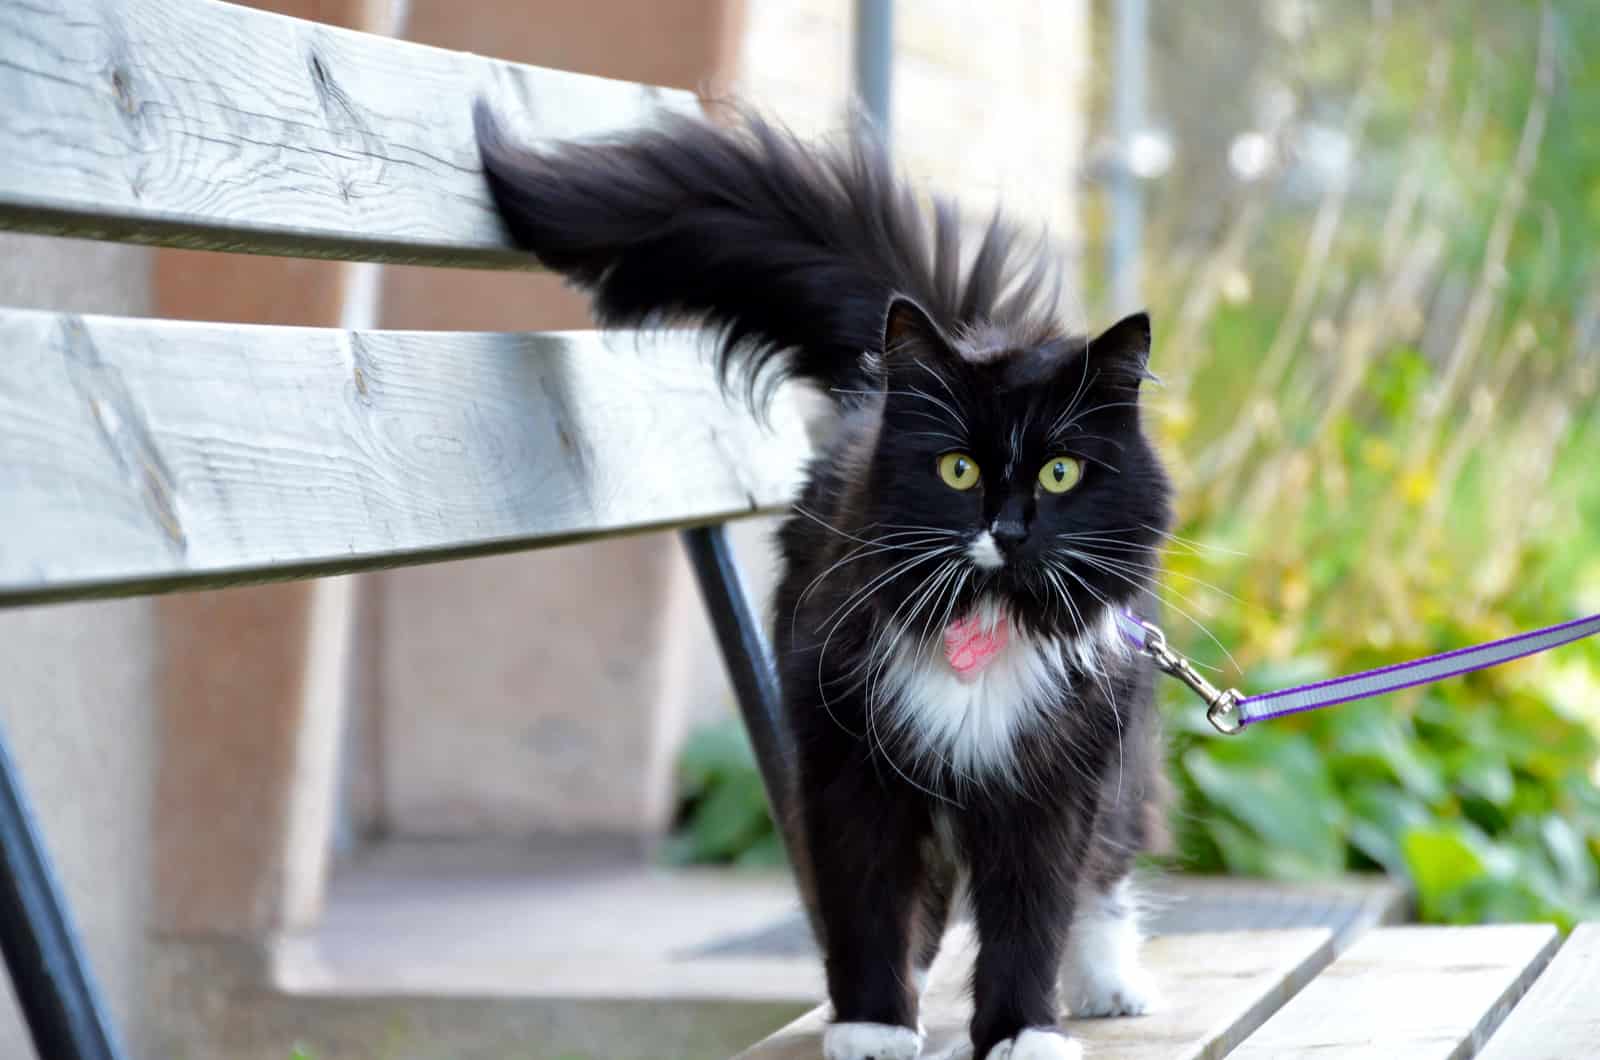 Tuxedo cat with long whiskers outside with purple harness